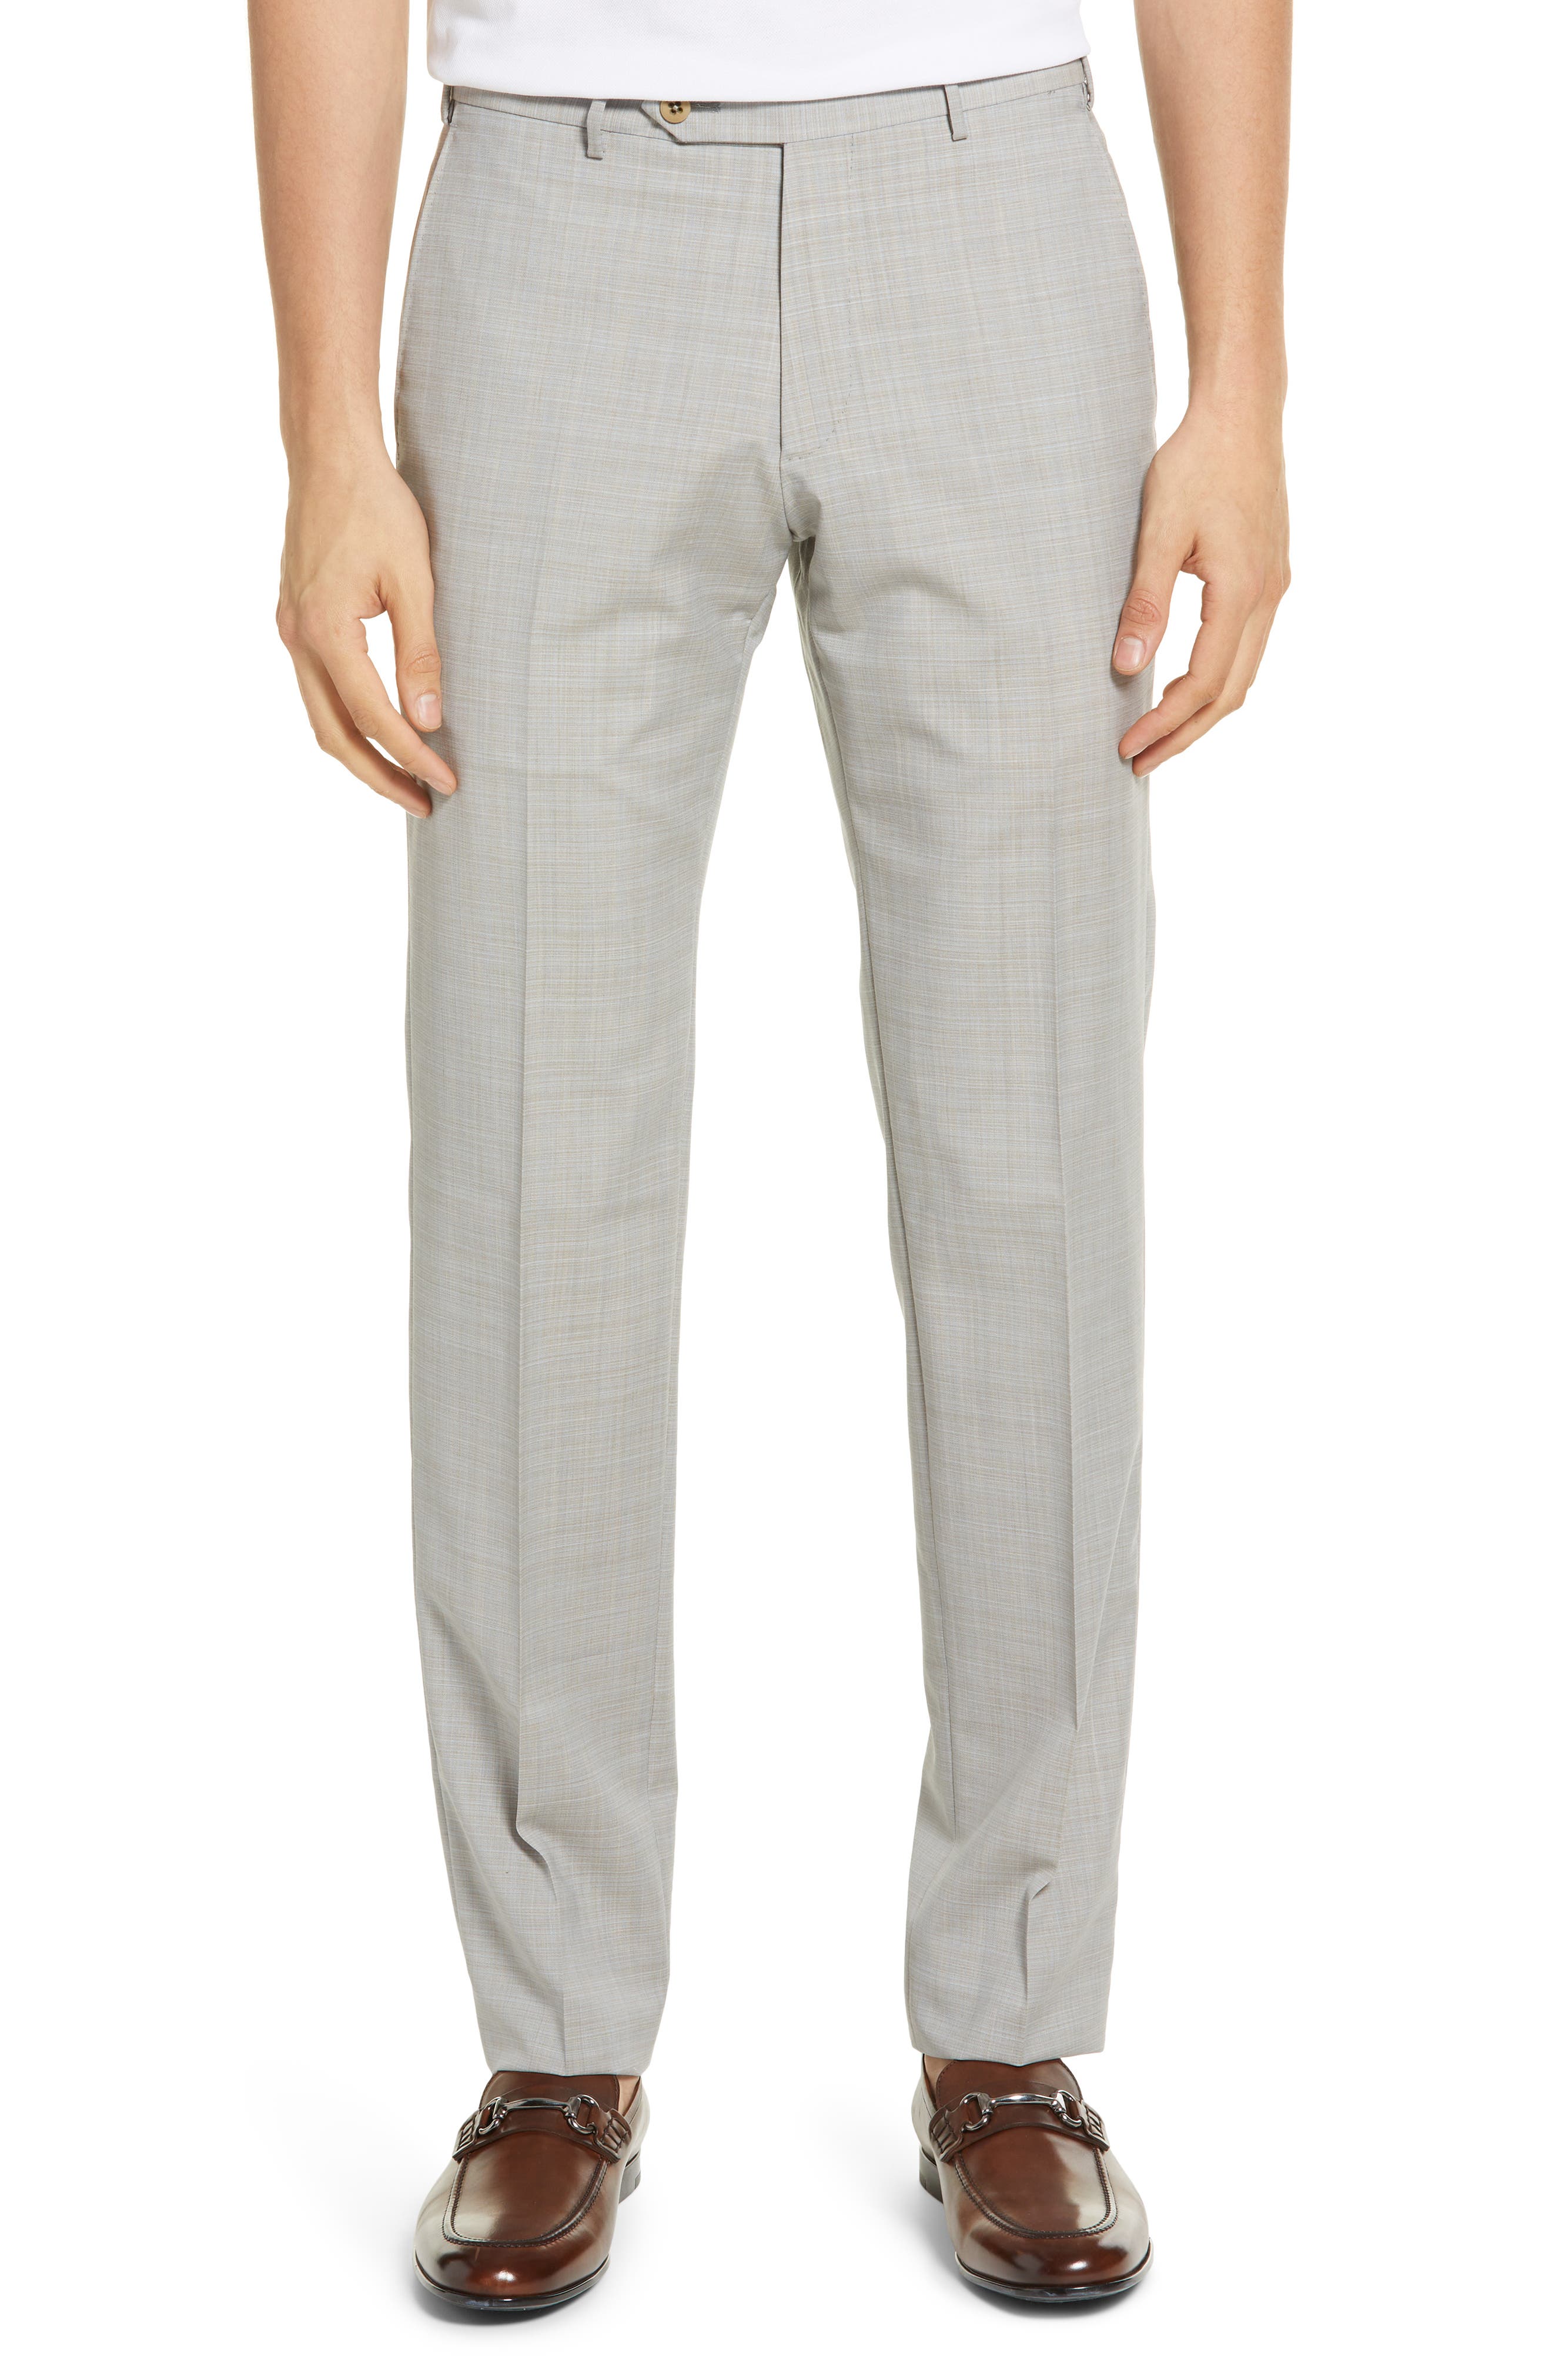 Zanella NWT Dress Pants Size 34 In Solid White 100% Linen Parker